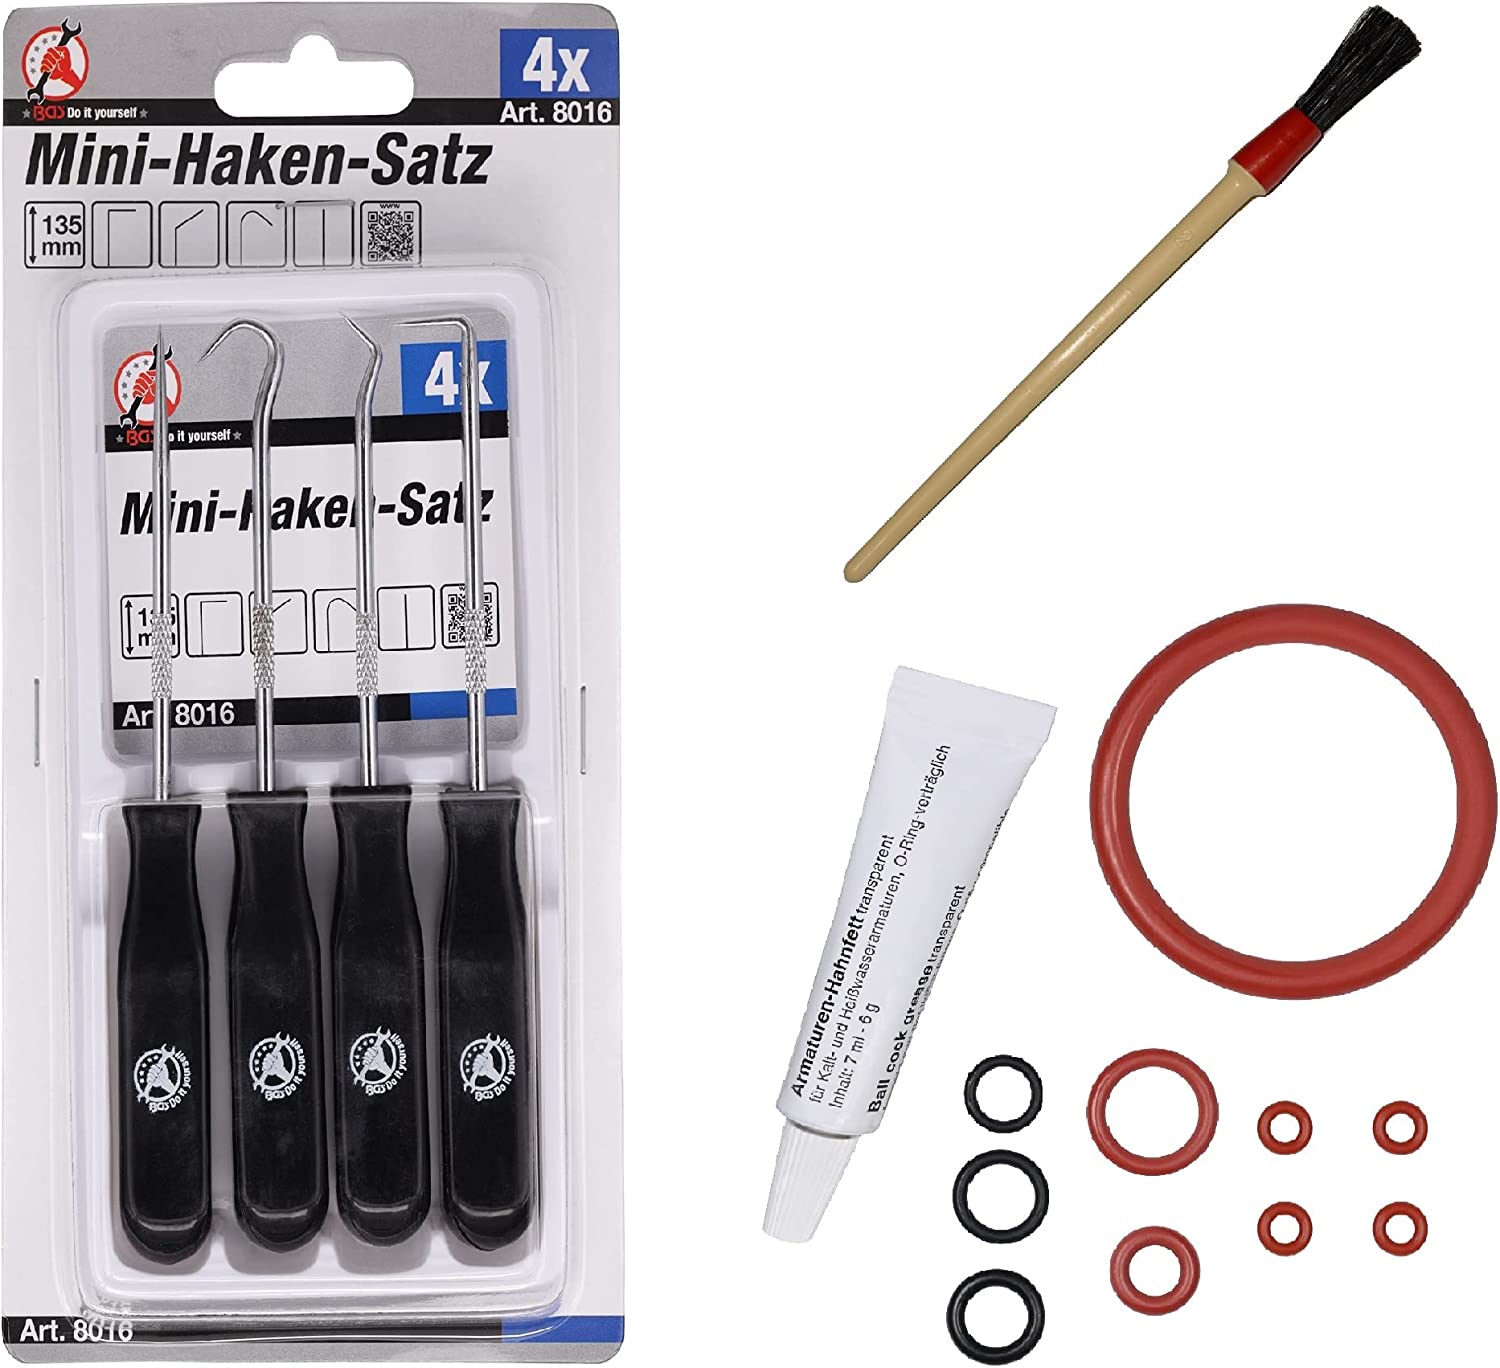 Maintenance Kit XXL Gasket O-Ring for Brewing Group Outlet Valve Outlet Nozzle Compatible with Philips Saeco Spidem Gaggia Set-41 Includes 6 G Tube of Food Greas, Tool Cleaning Brush & Hook Set